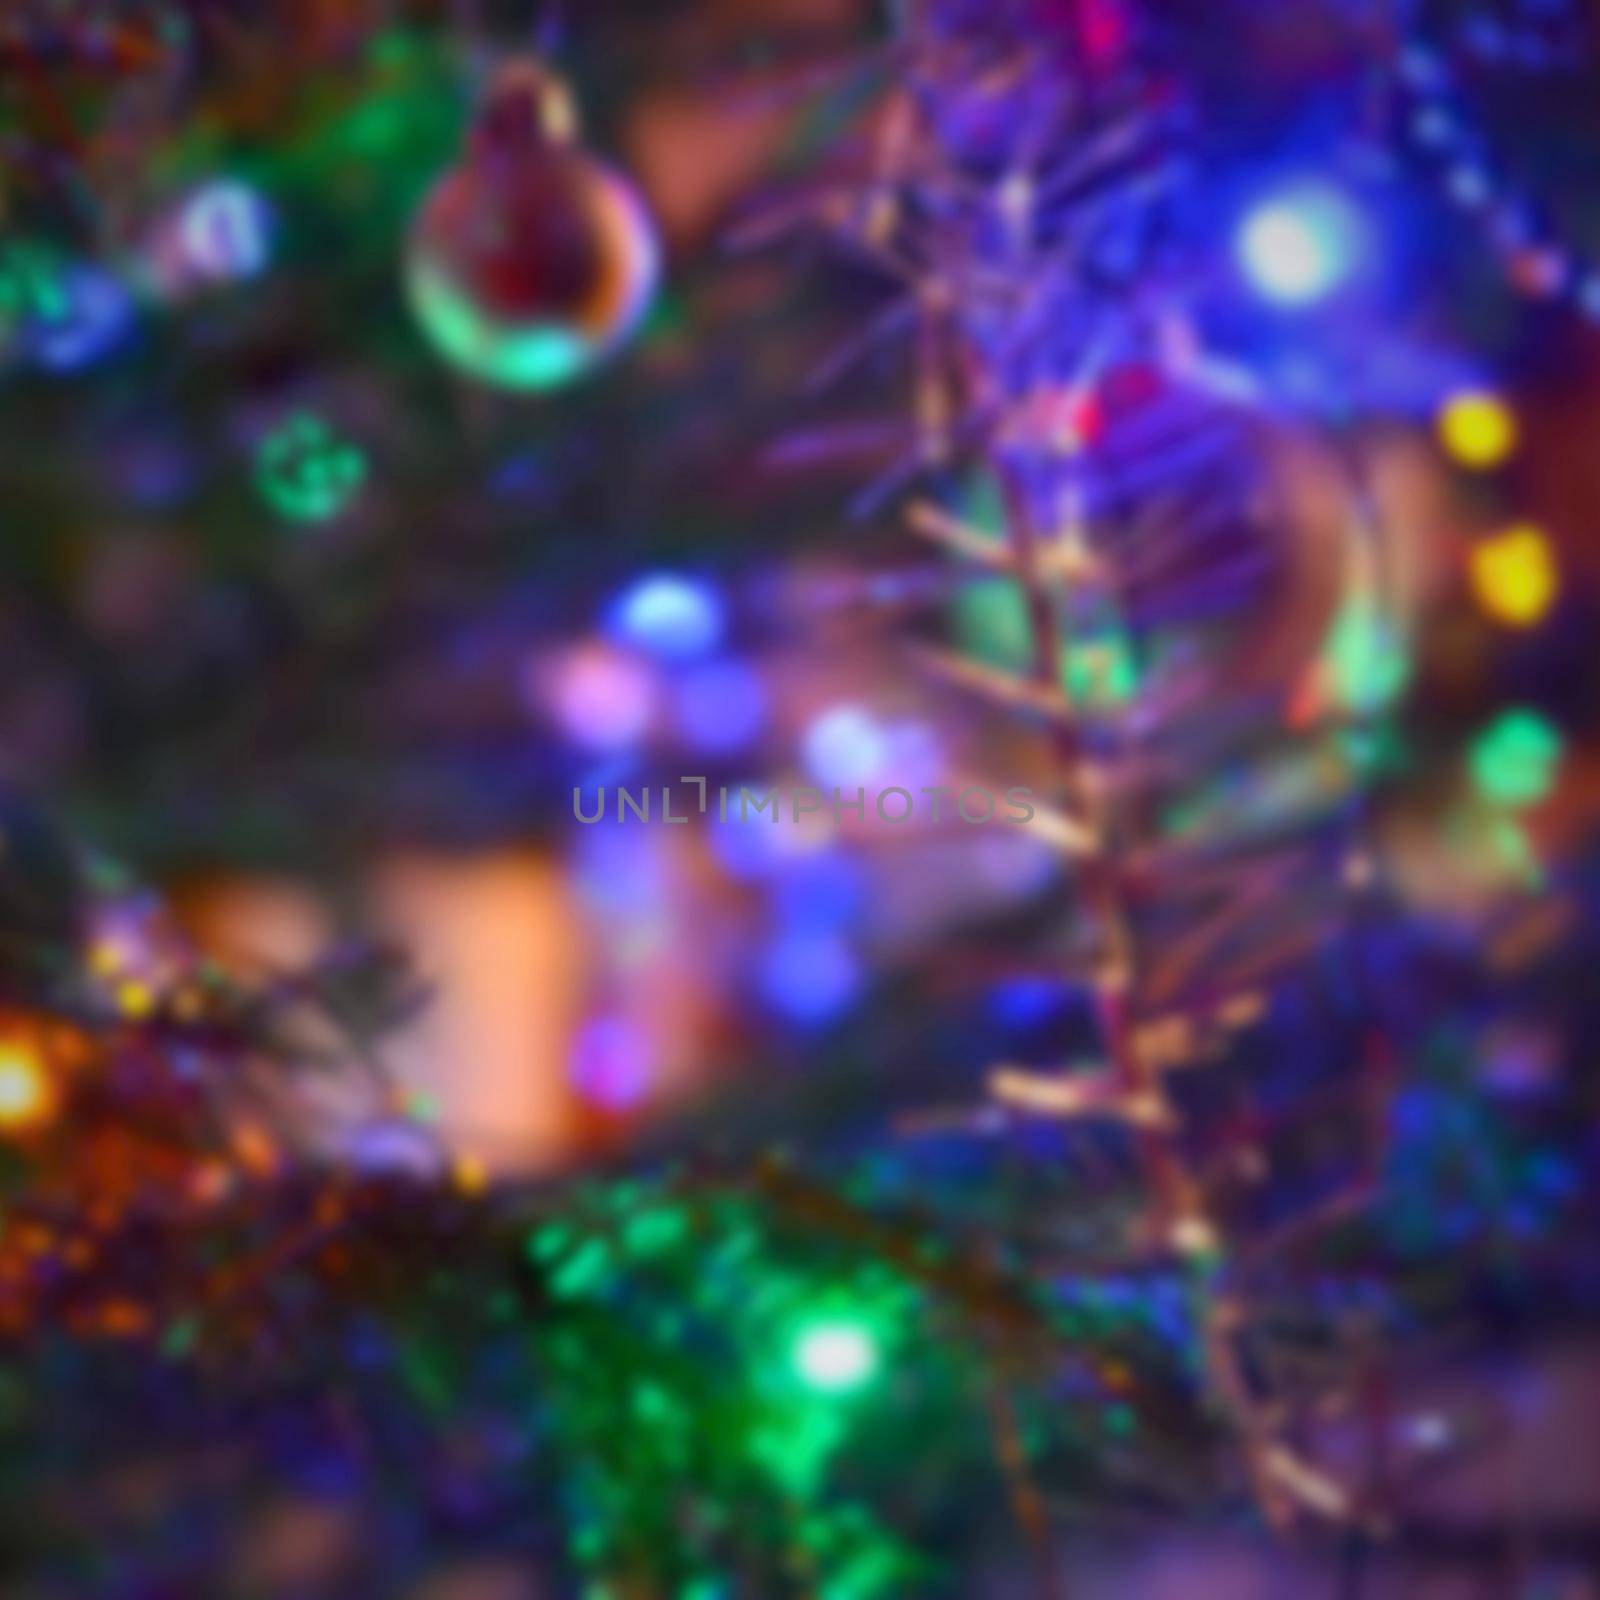 Blurred xmas background, christmas texture and background from color lights.